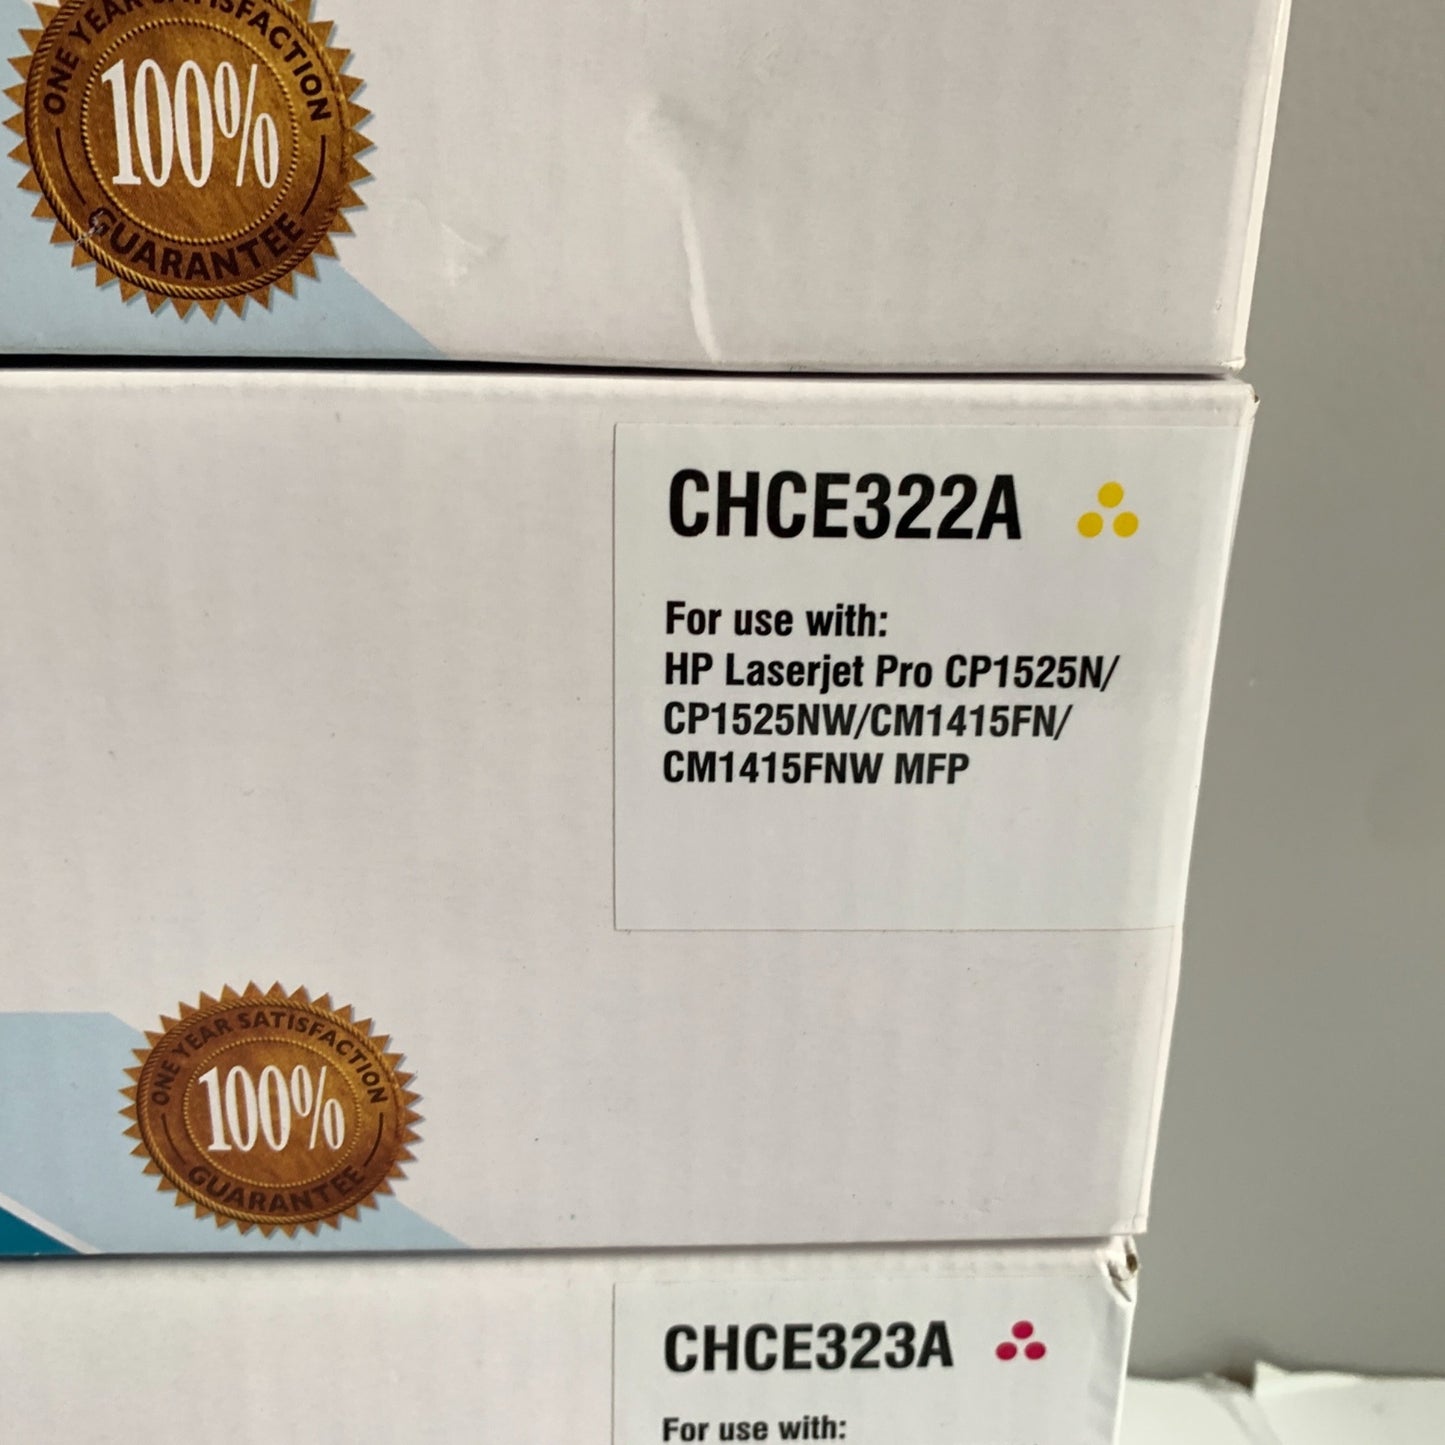 CHCE321A CHCE322A CHCE323A Toner Cartridges for HP Laserjet PRO CP1525N